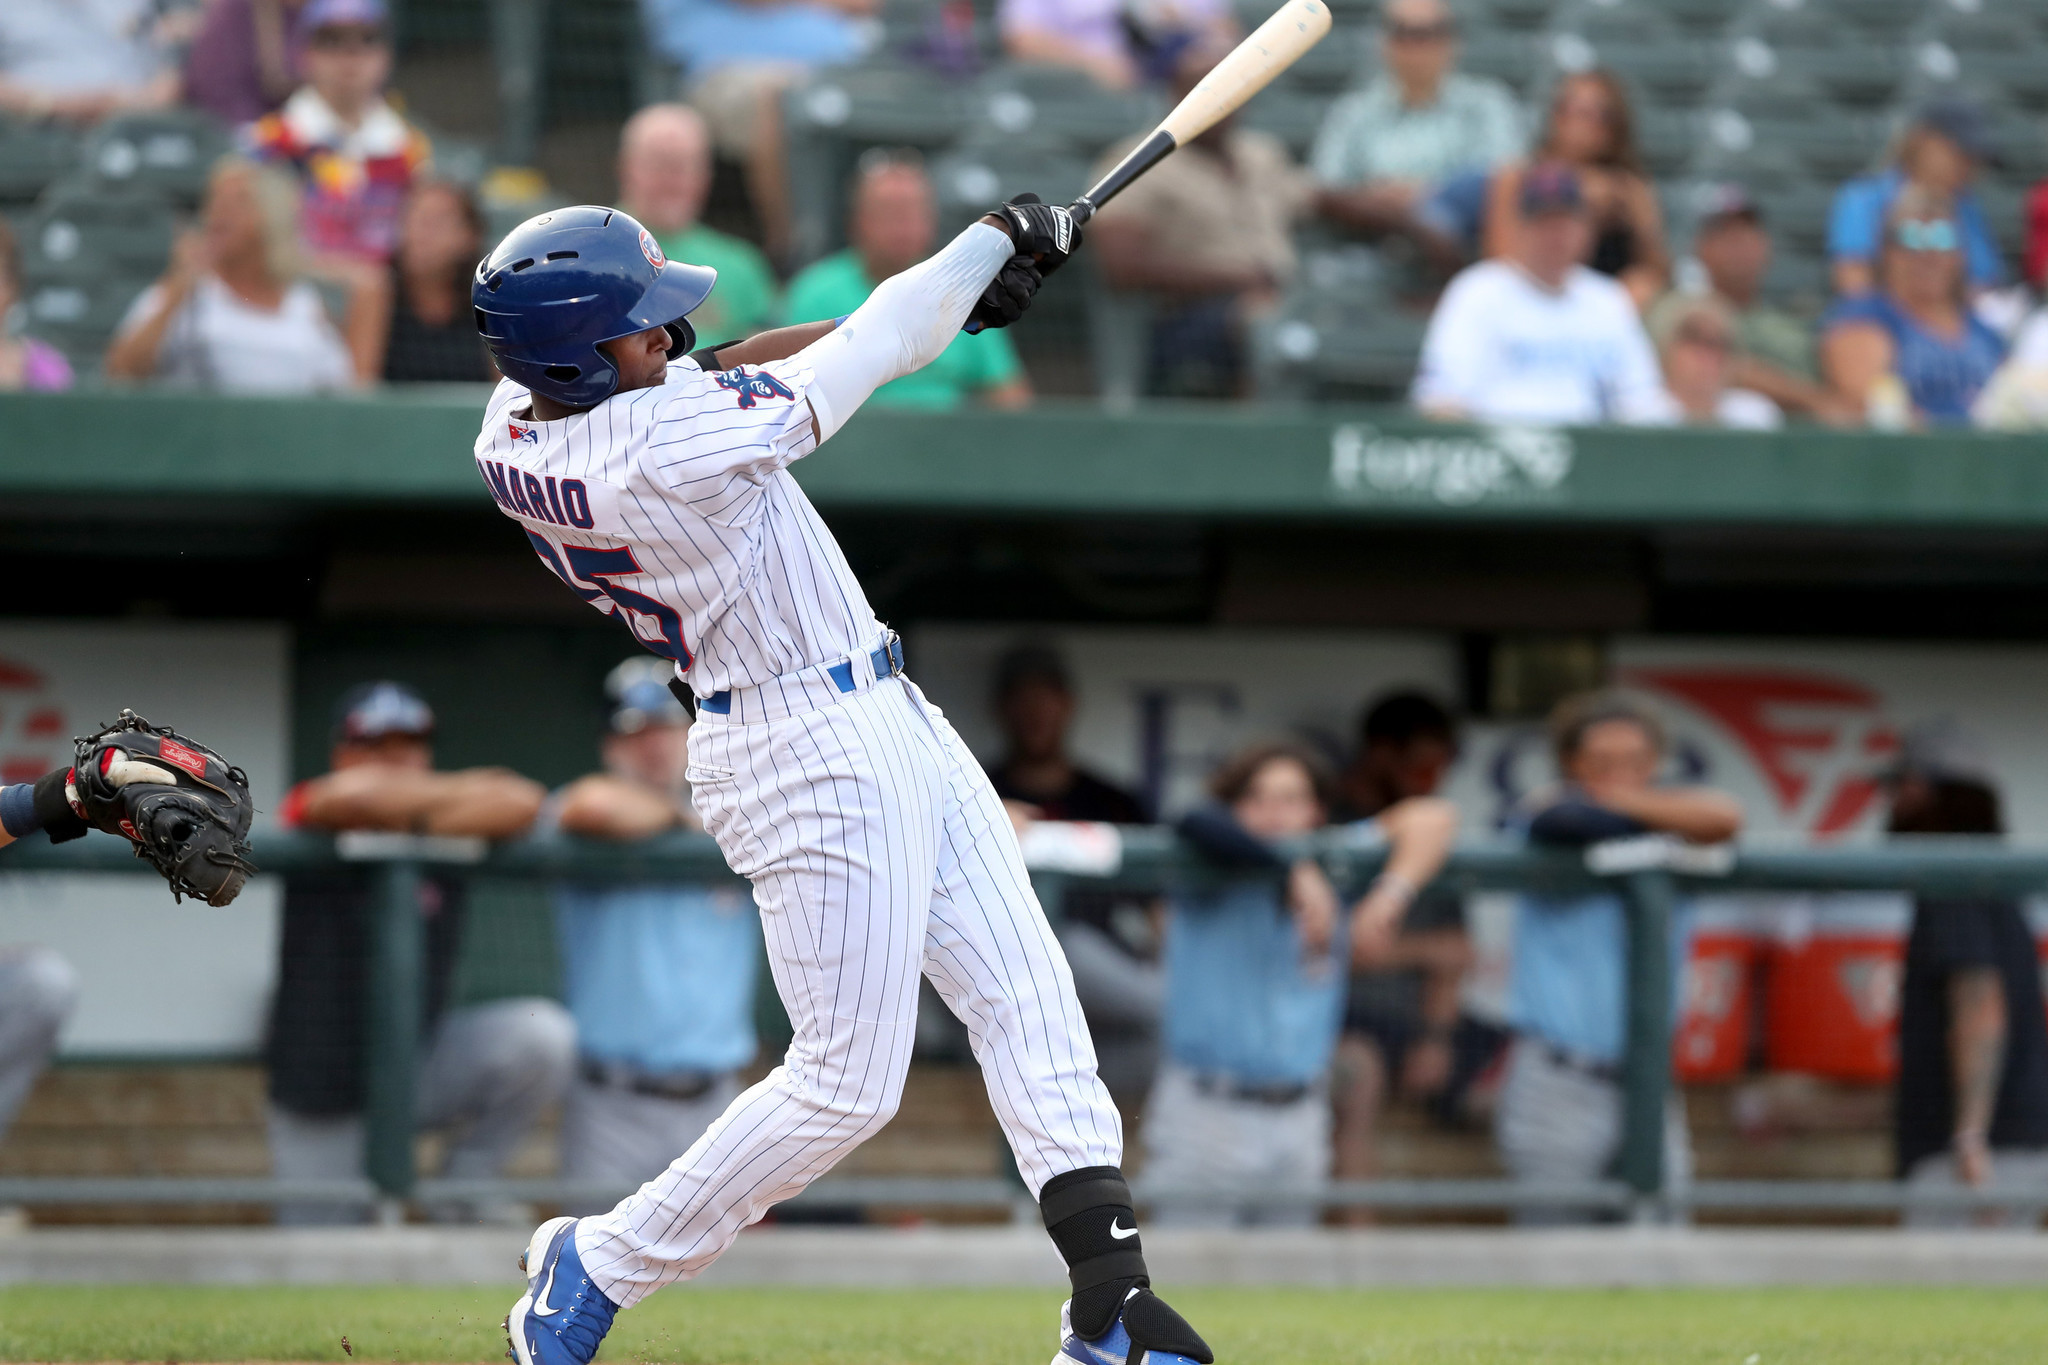 These five prospects from Chicago Cubs' fire sale land in South Bend